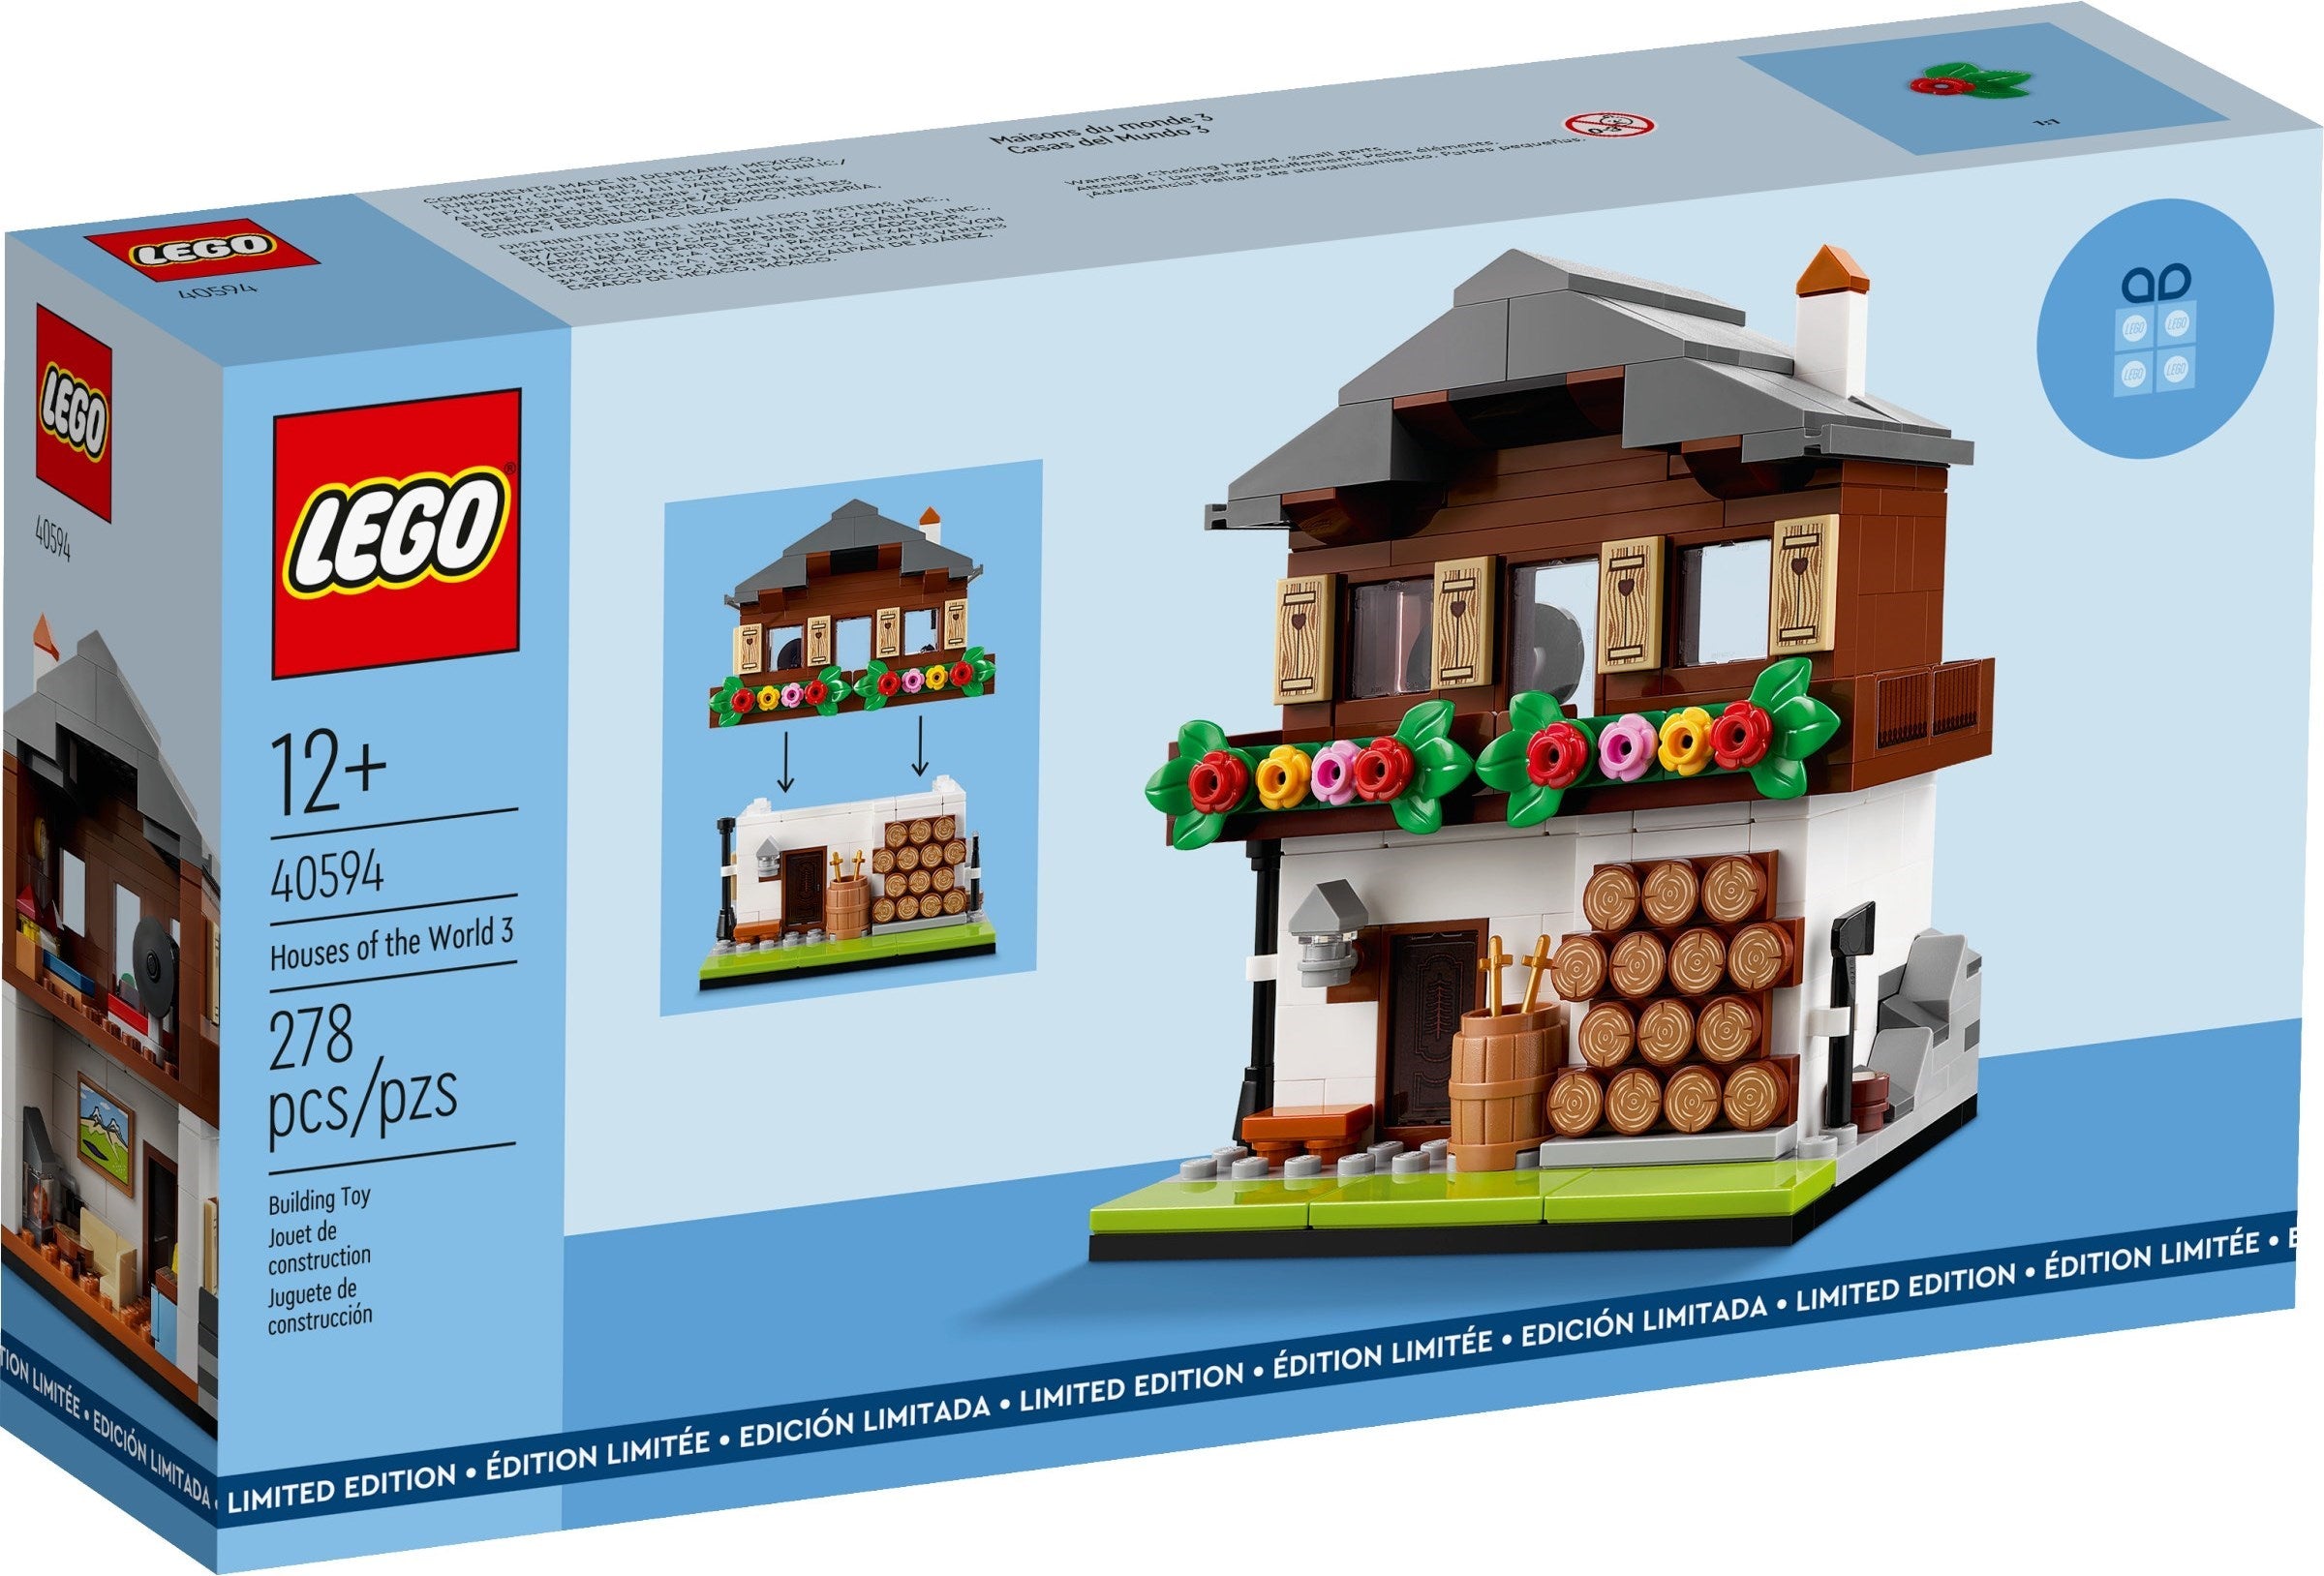 Lego Exclusive 40594 - Houses of the World 3